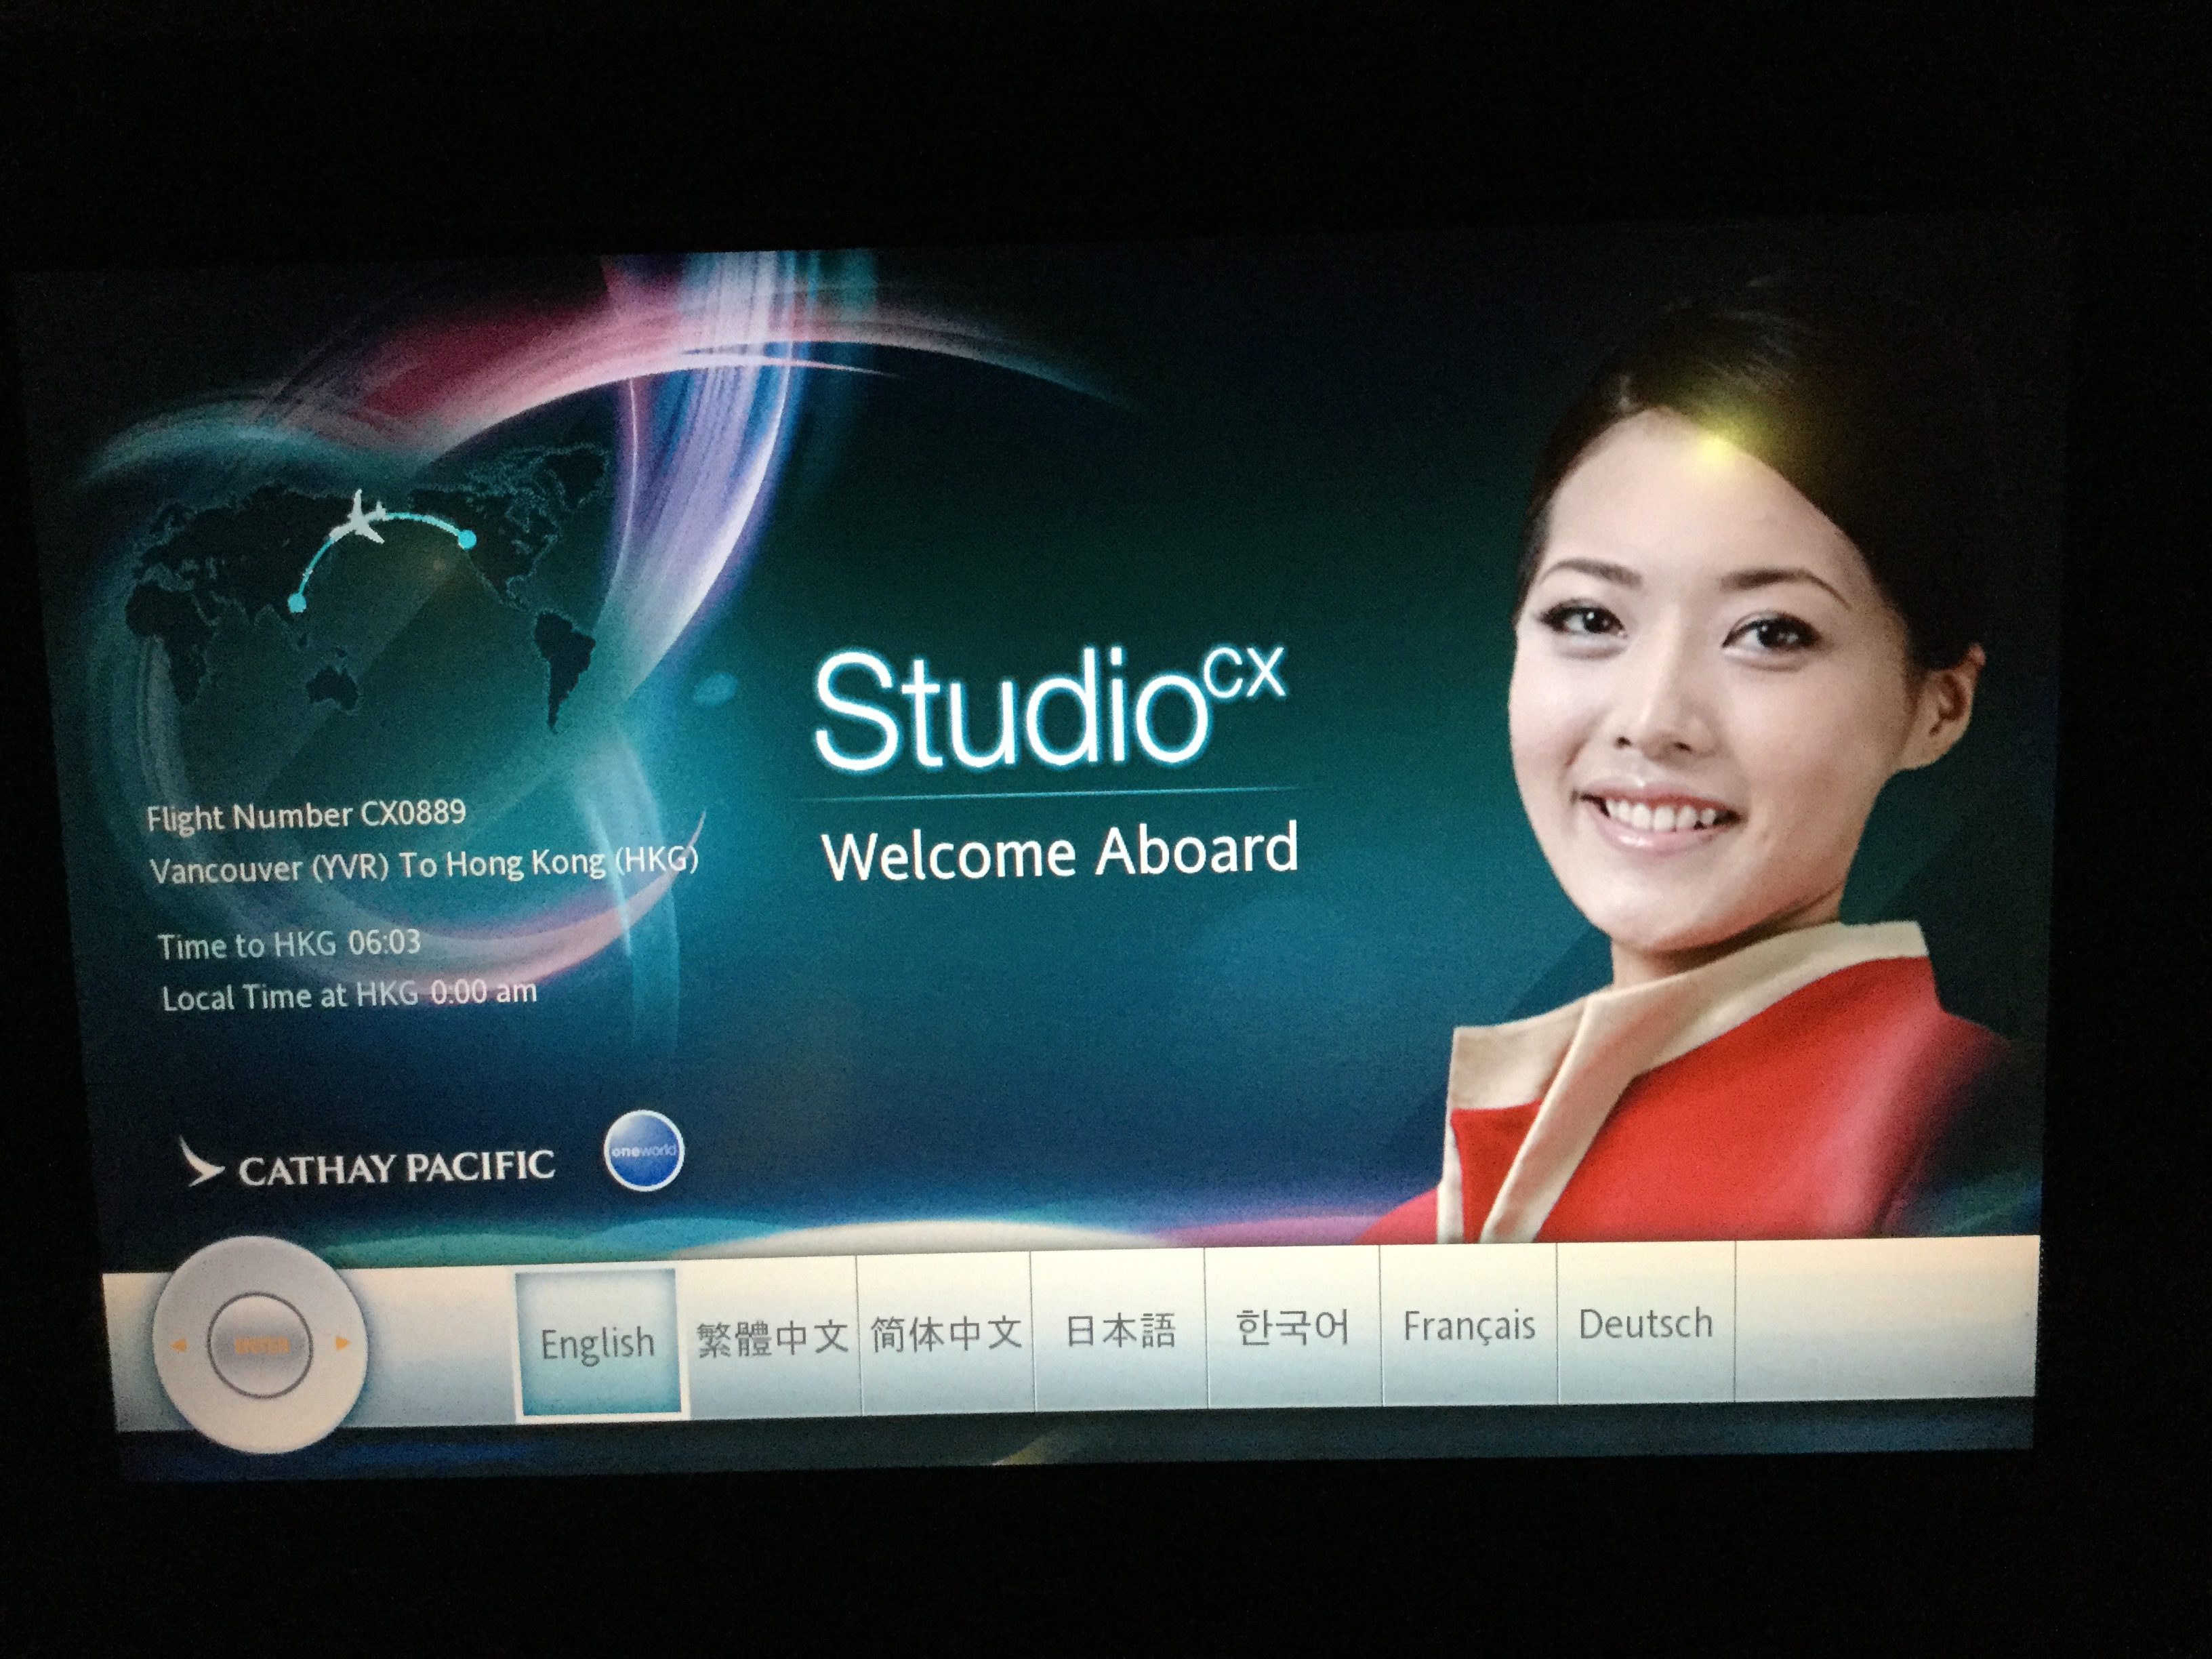 Cathay Pacific Business Class Entertainment